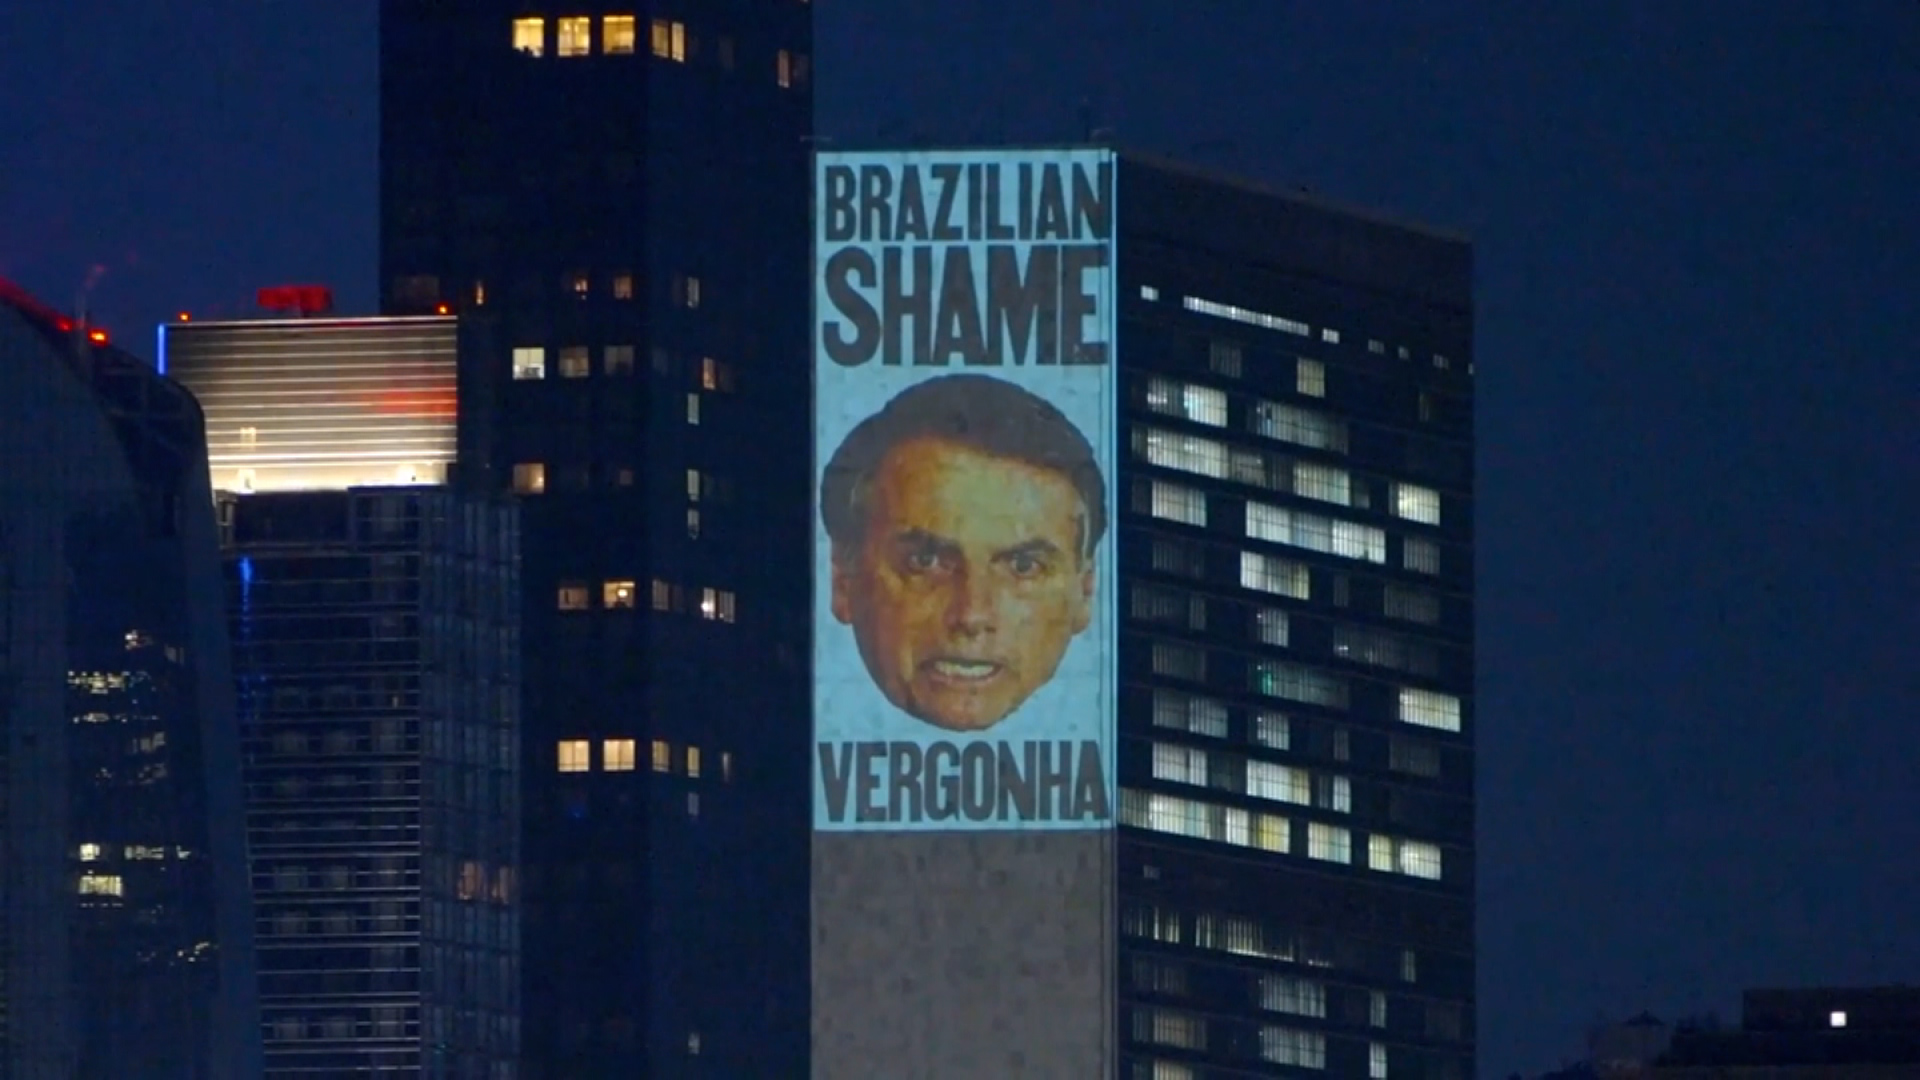 Anti-Bolsonaro activists project an image of the Brazilian president on the side of the United Nations building in New York City.